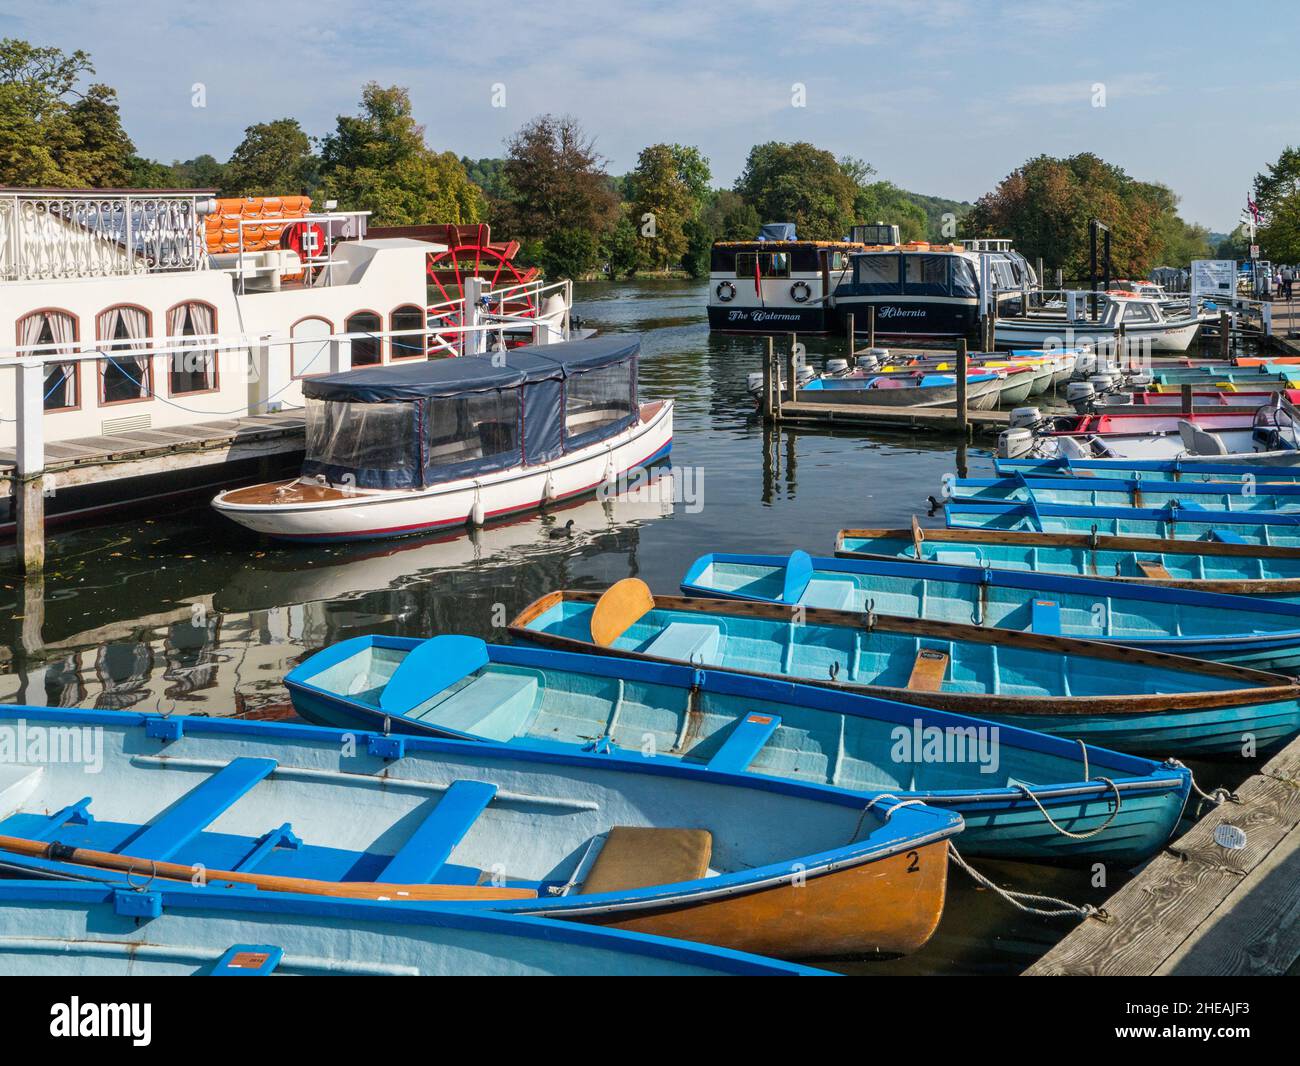 Colourful riverside scene with blue rowing boats, River Thames, Henley On Thames, Oxfordshire, UK Stock Photo